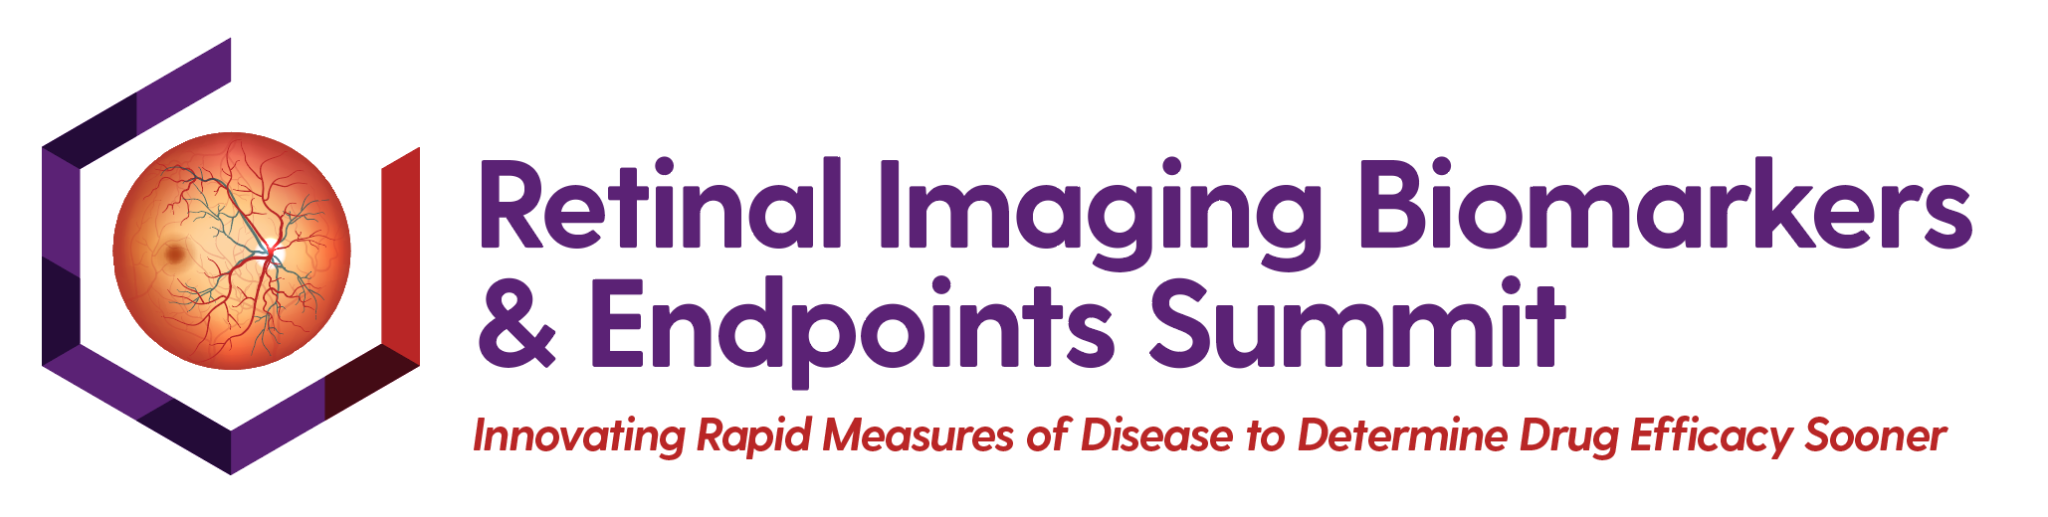 5756_Retinal-Imaging-Biomarkers-Endpoints-logo-2048x517-1